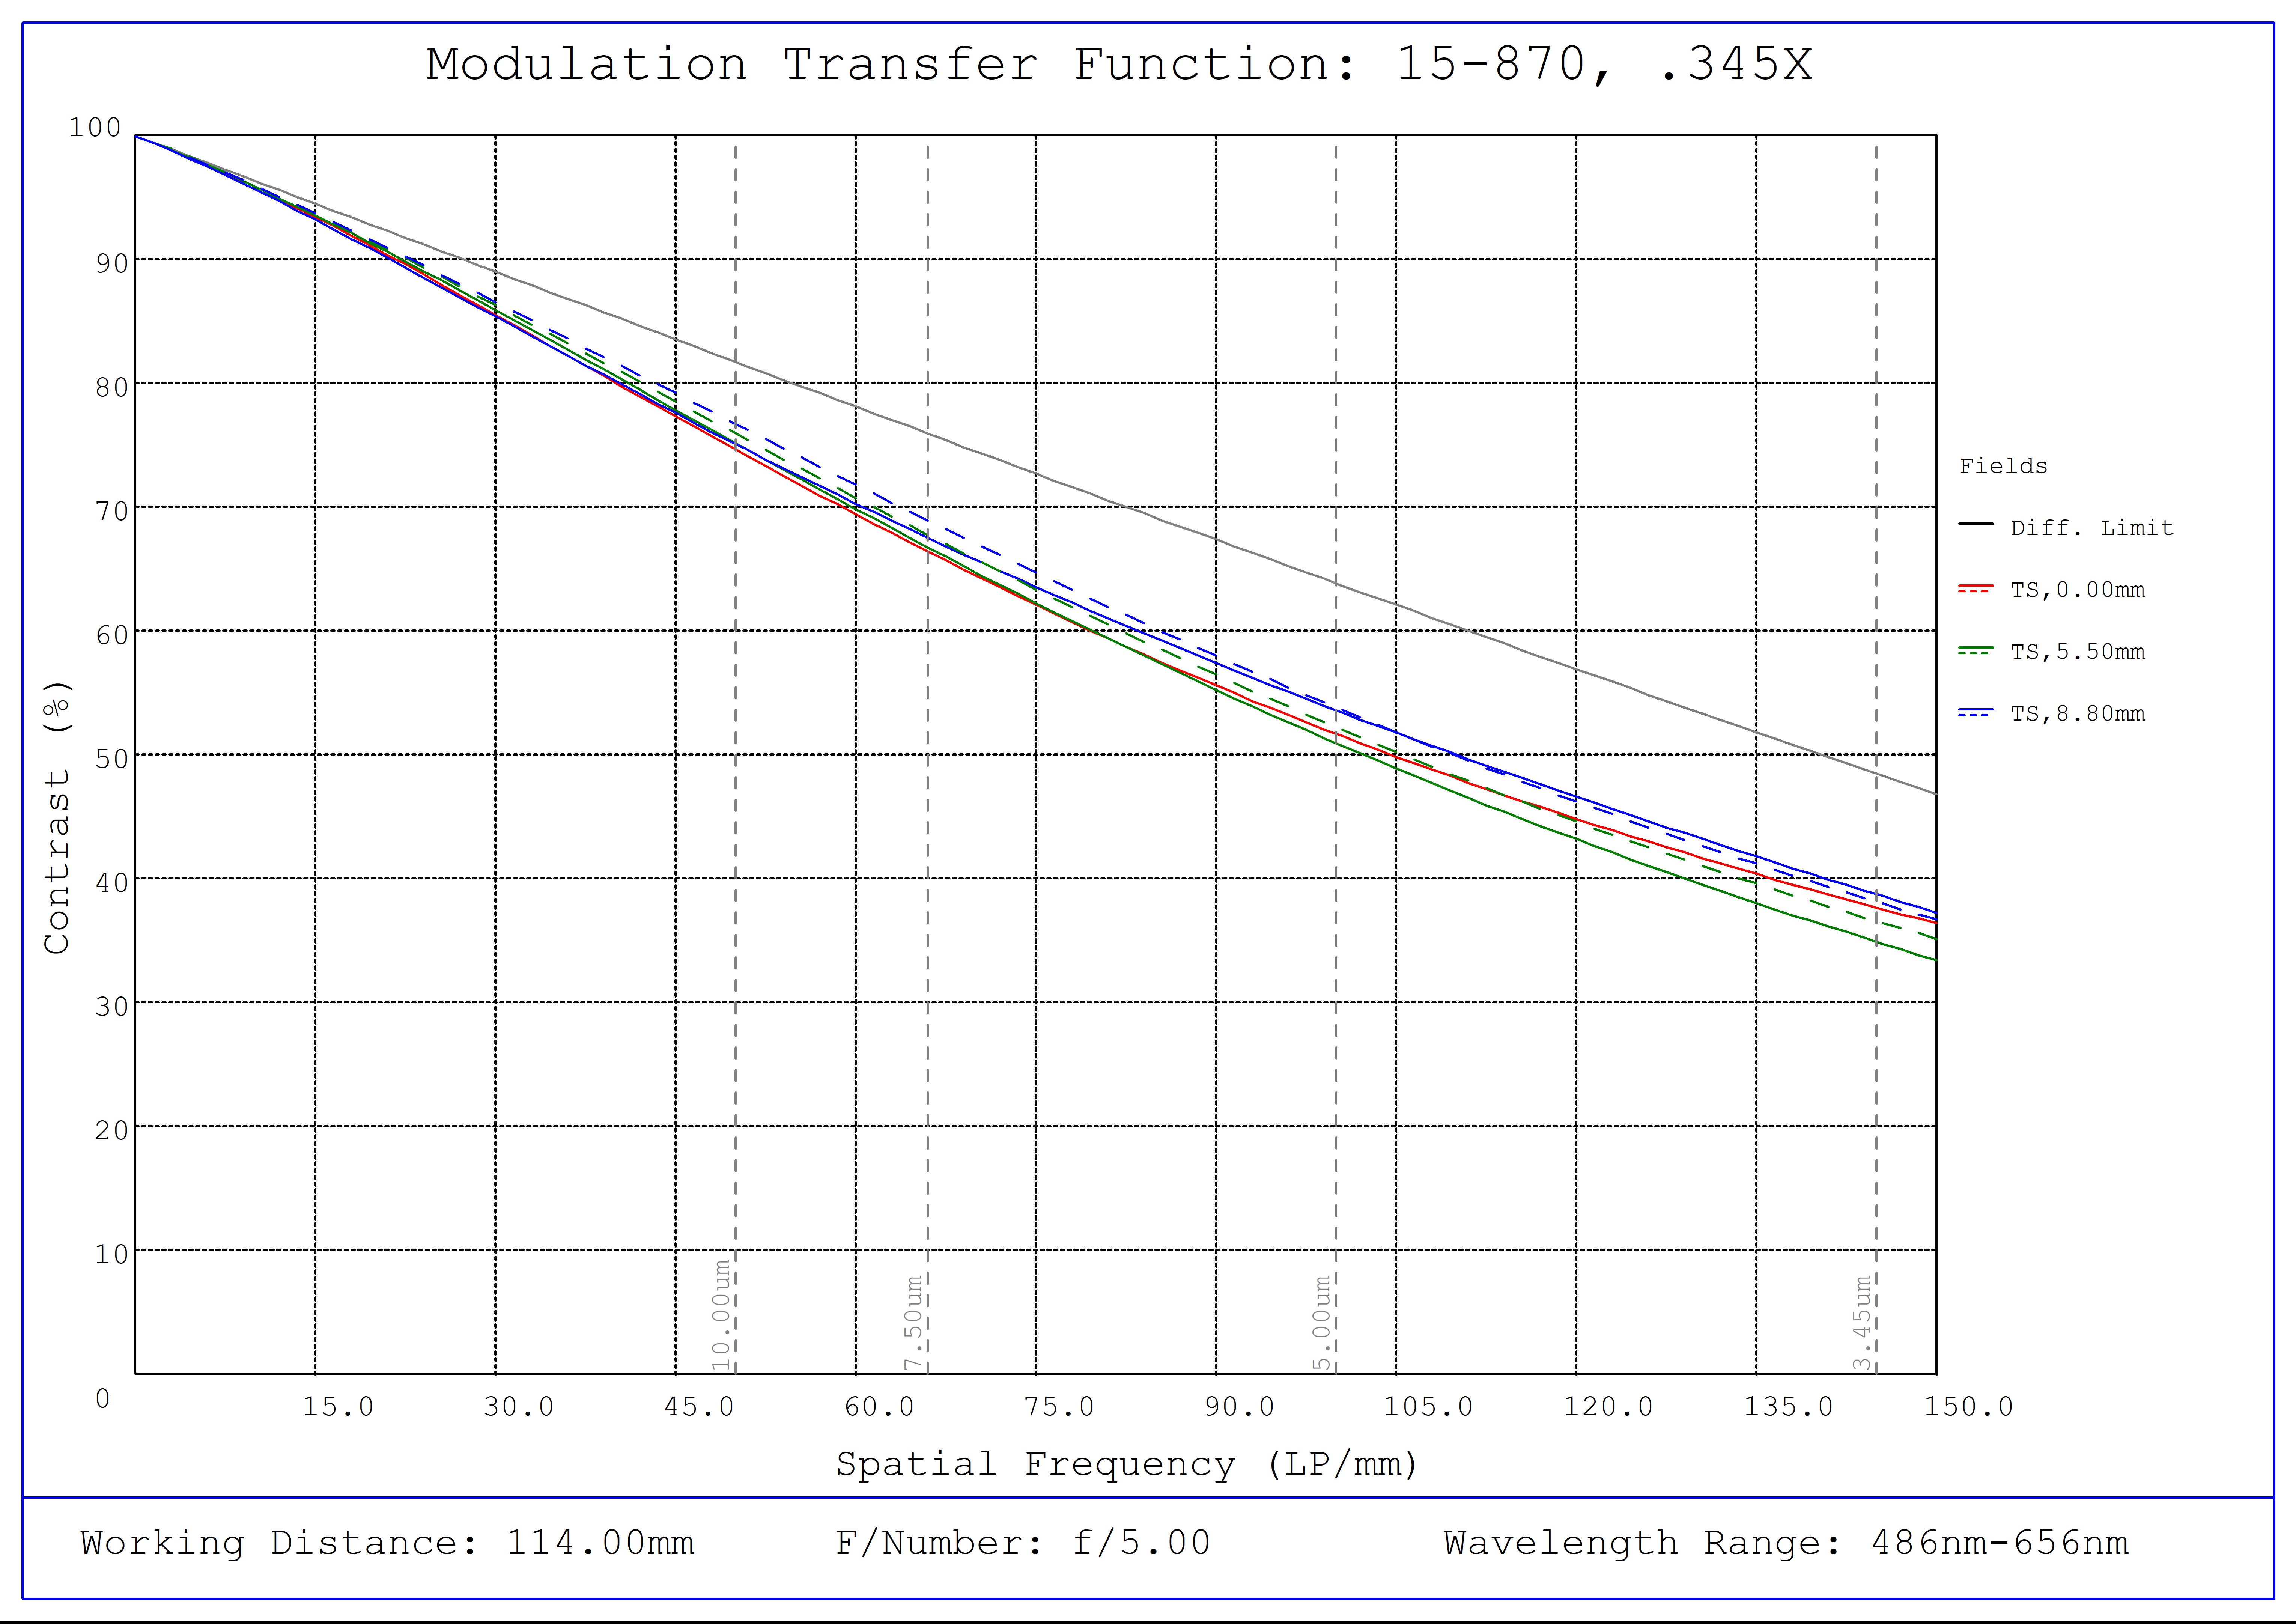 #15-870, 0.345X CobaltTL Telecentric Lens, Modulated Transfer Function (MTF) Plot, 114mm Working Distance, f5